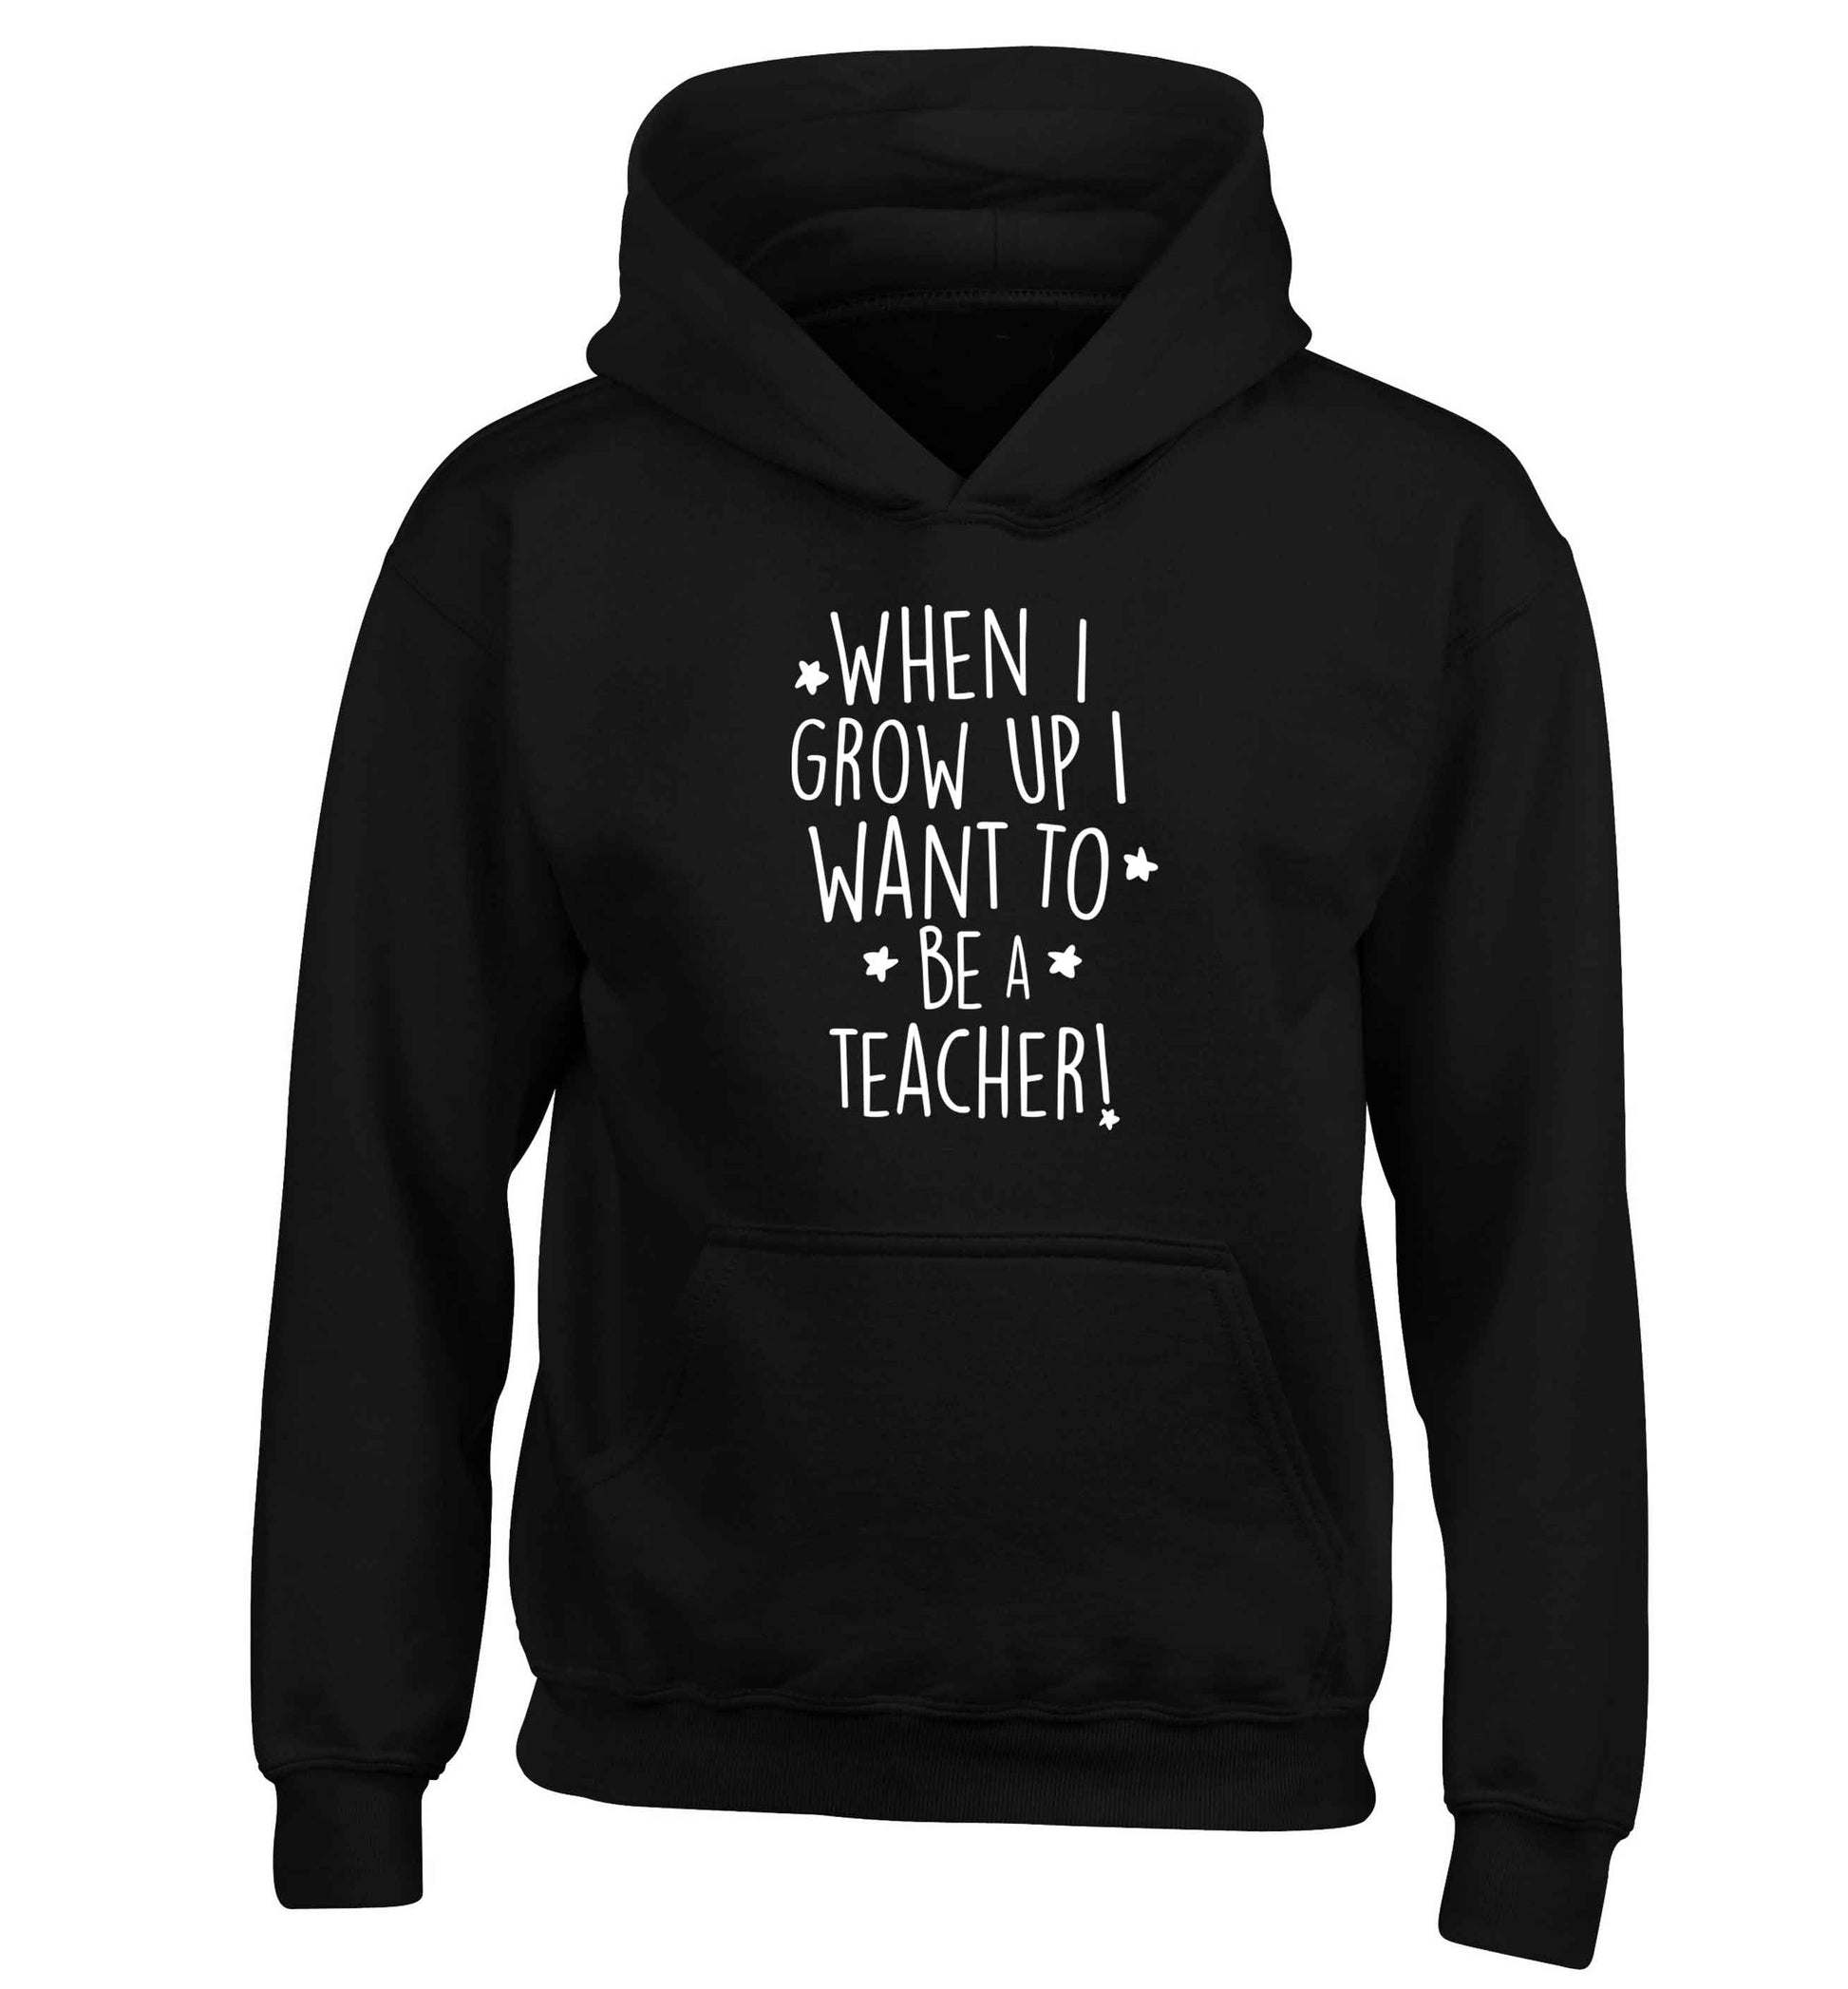 When I grow up I want to be a teacher children's black hoodie 12-13 Years